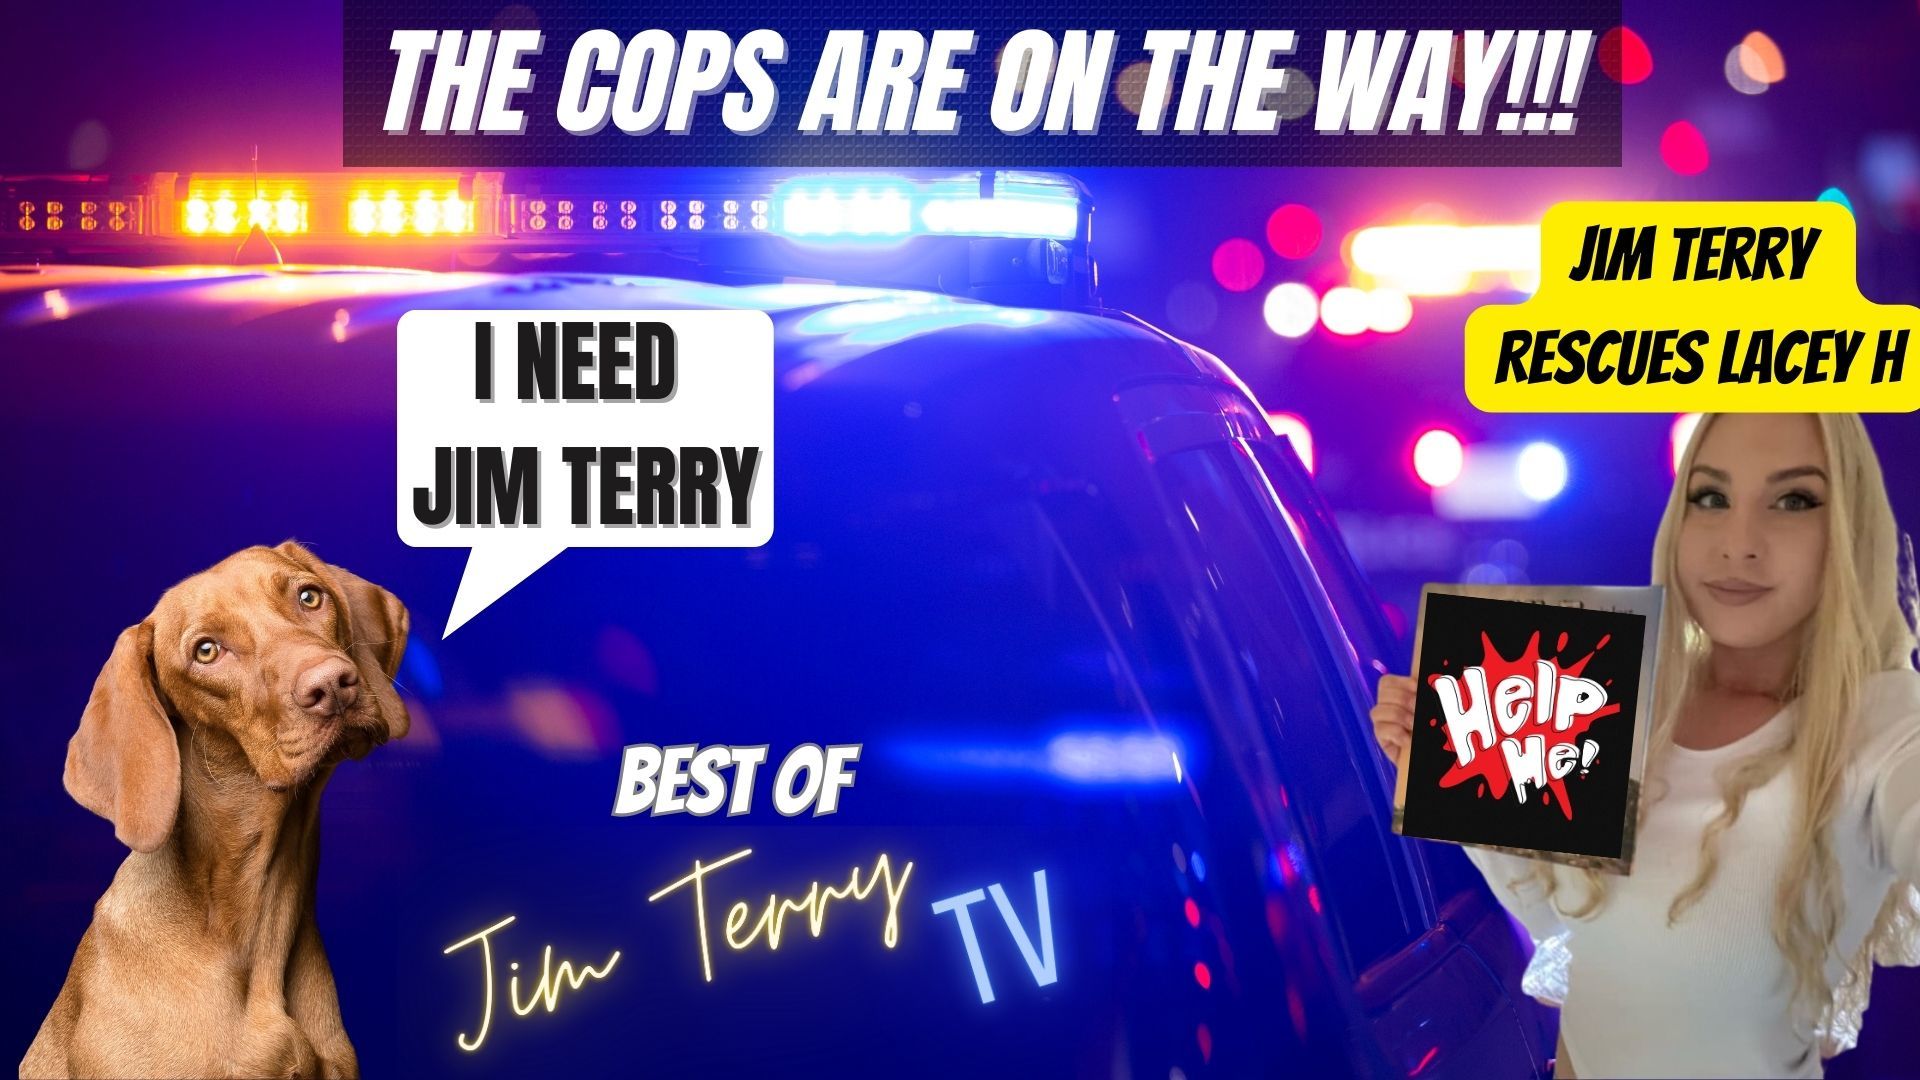 Best of Jim Terry TV: The Cops Are On the Way